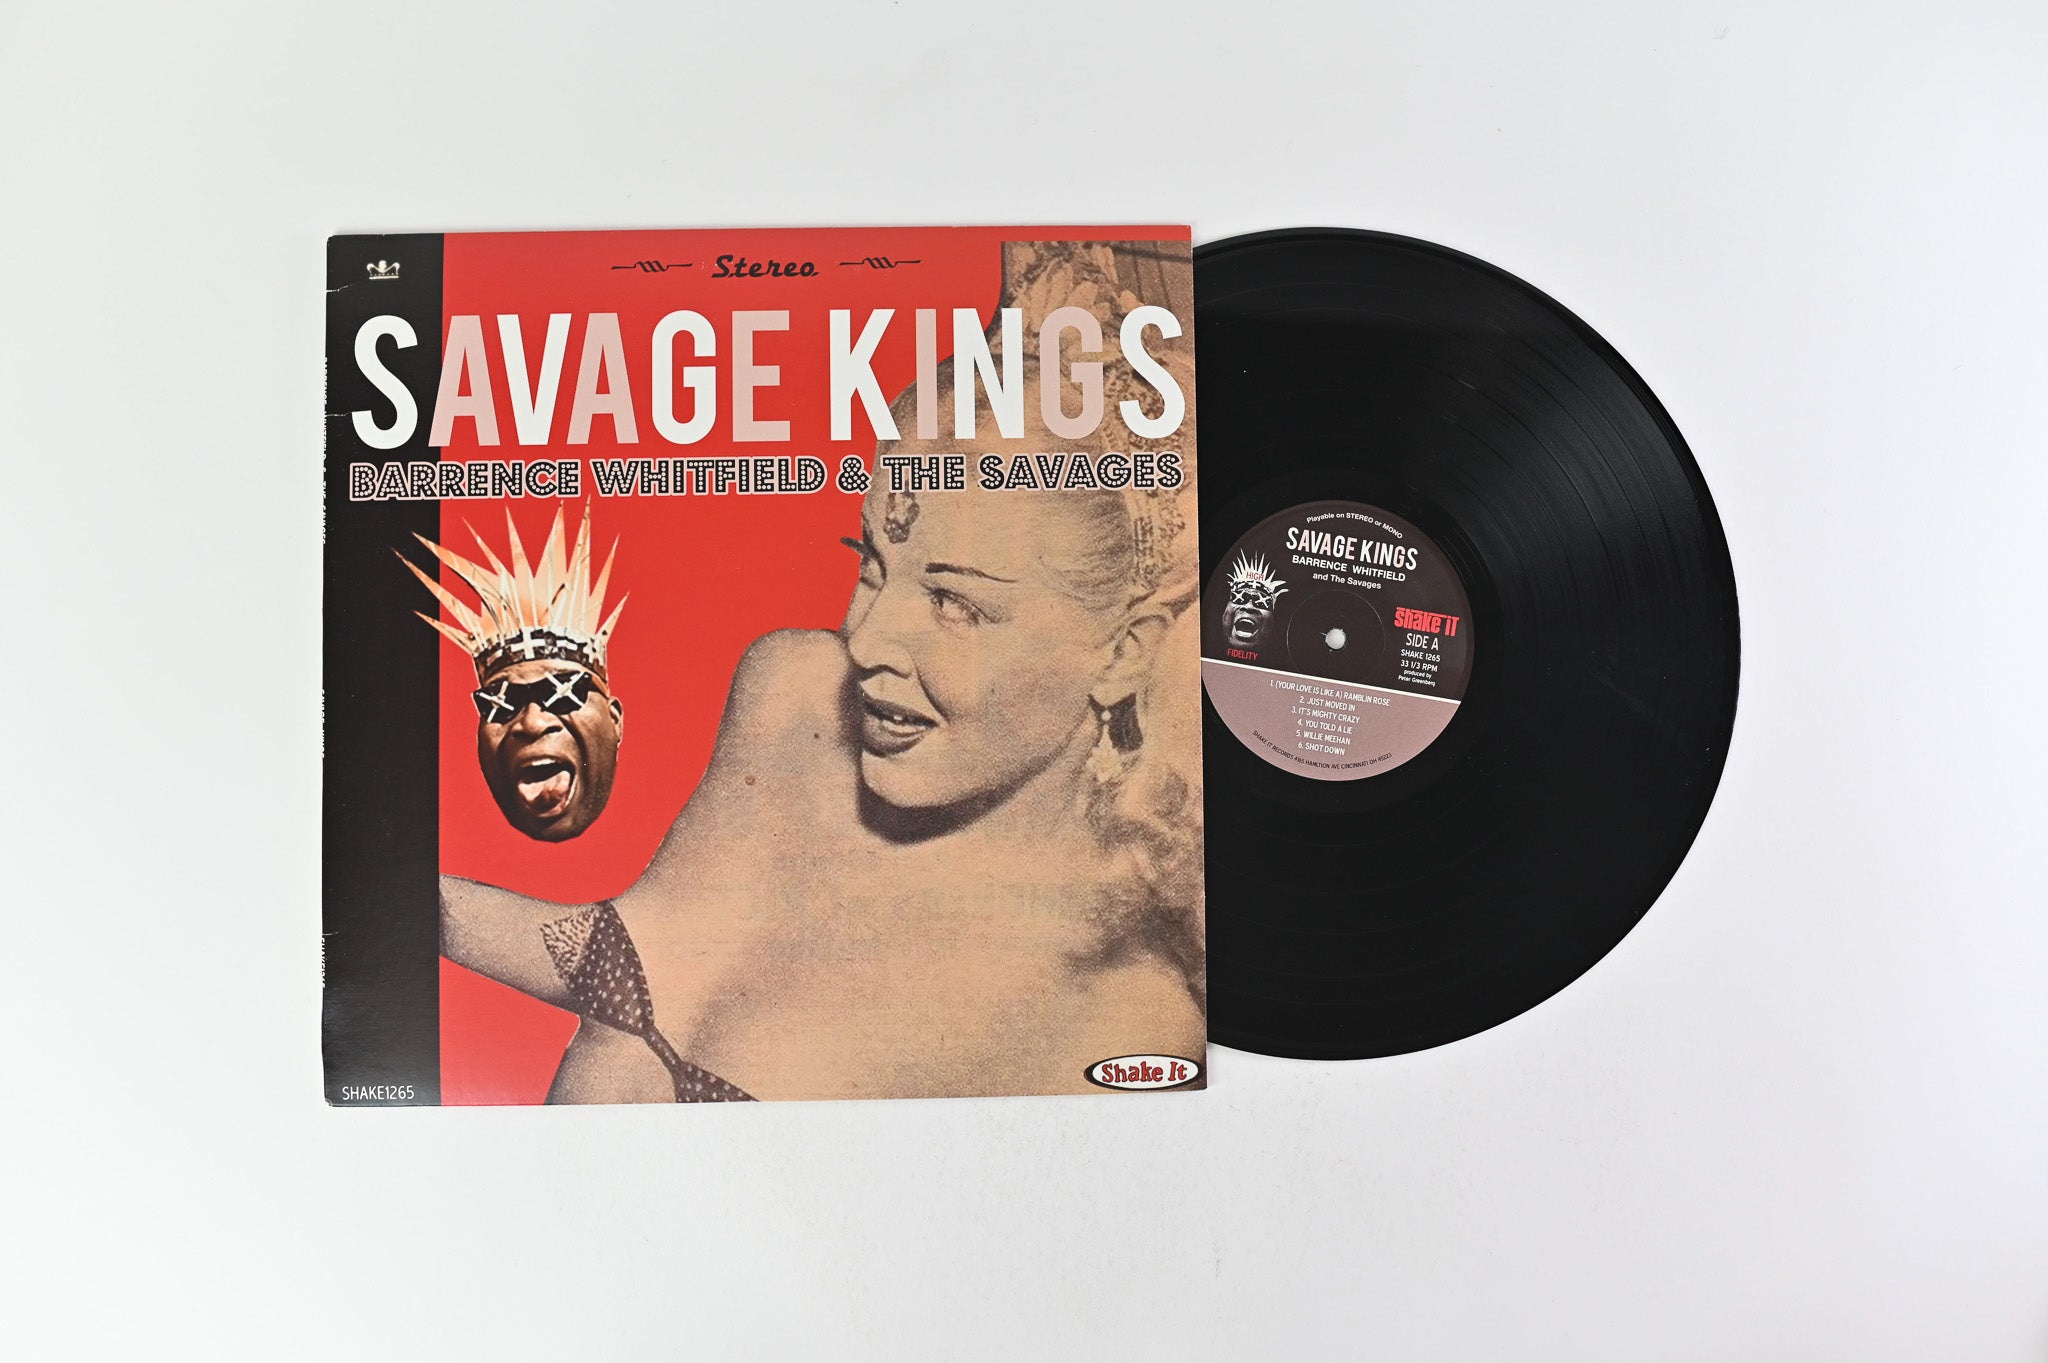 Barrence Whitfield & The Savages – Savage Kings on Shake It! Records